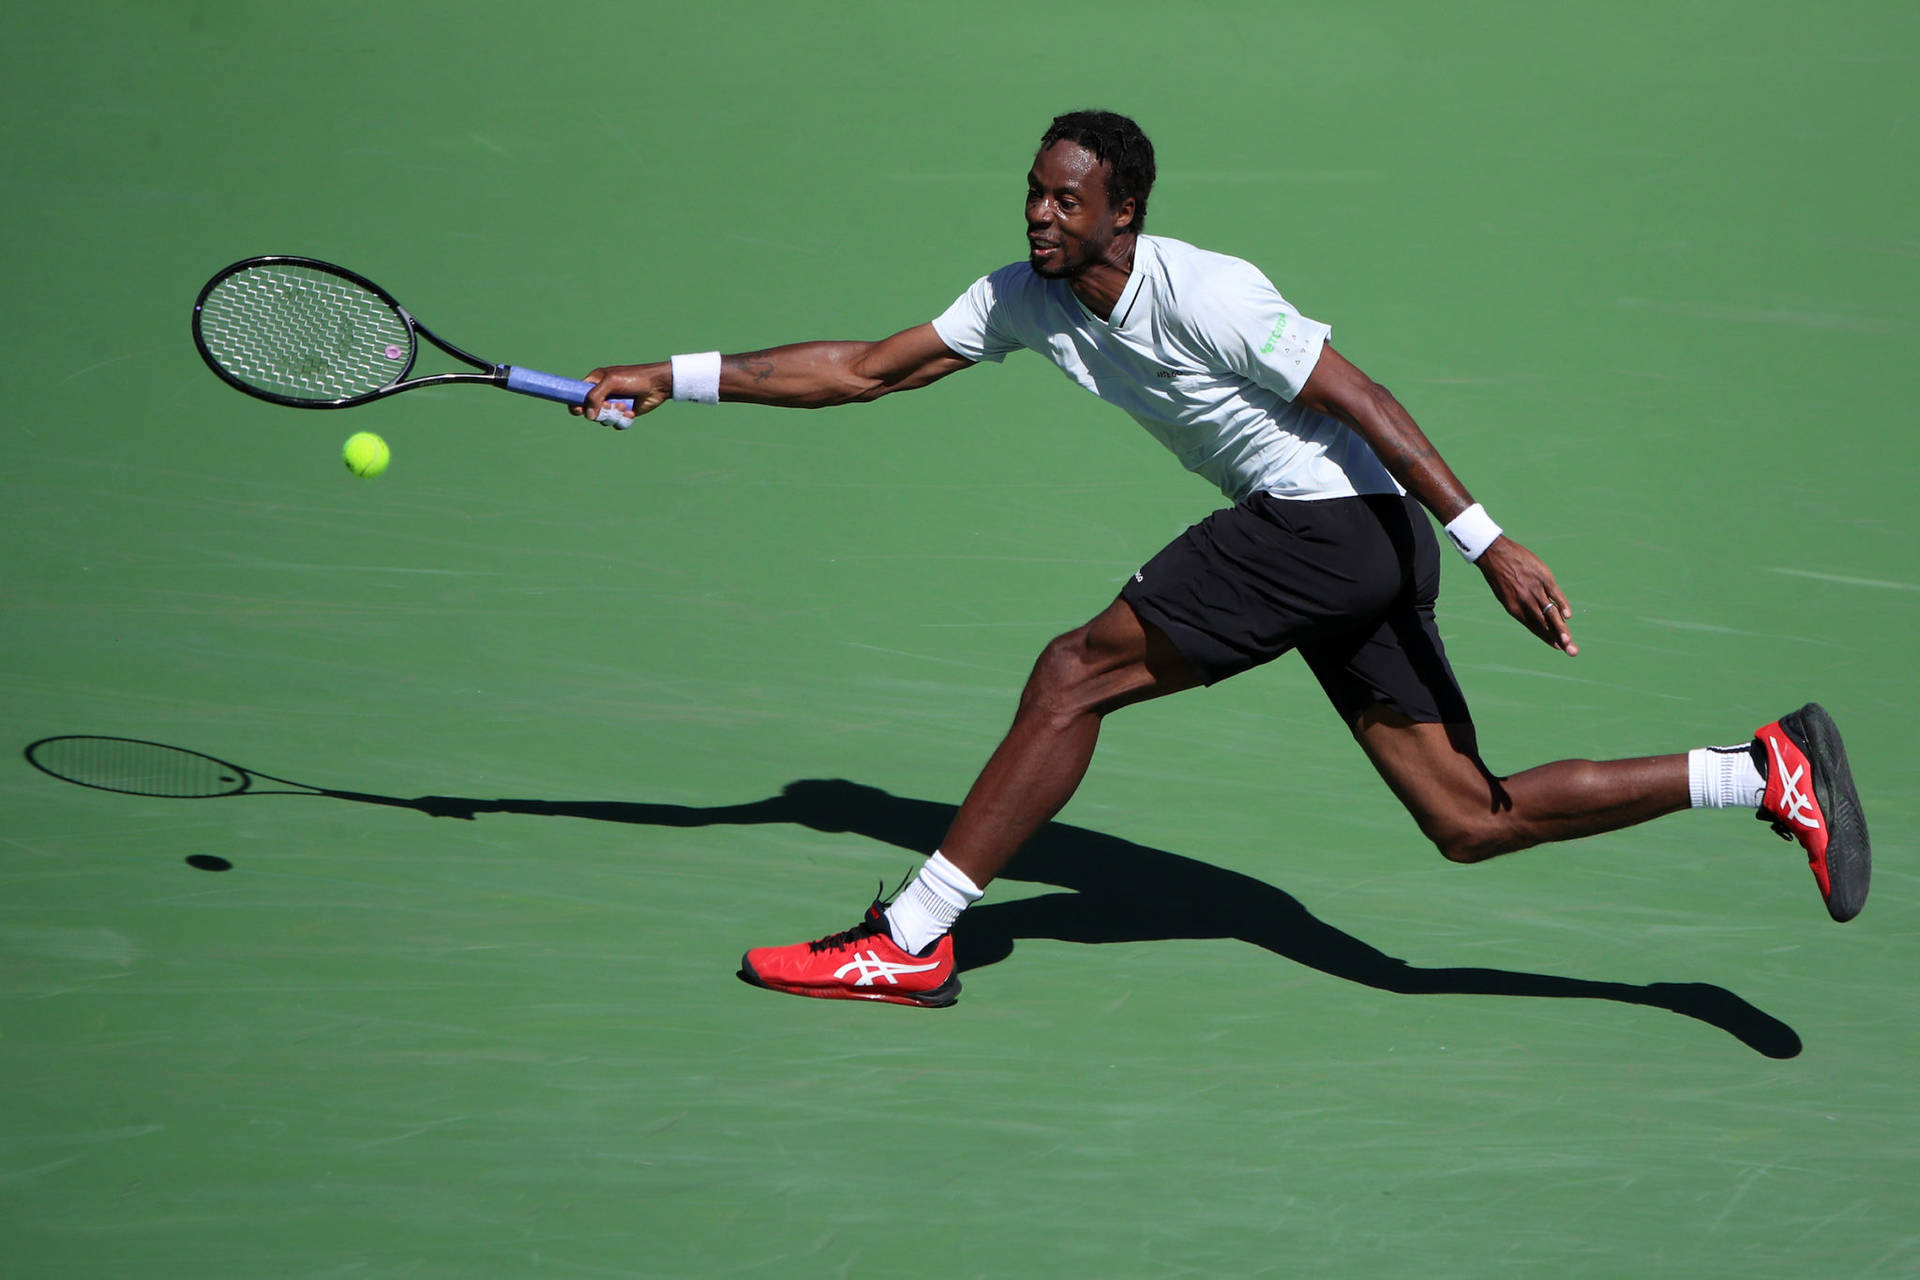 Gael Monfils in Action - An Extraordinary Athletic Performance Wallpaper